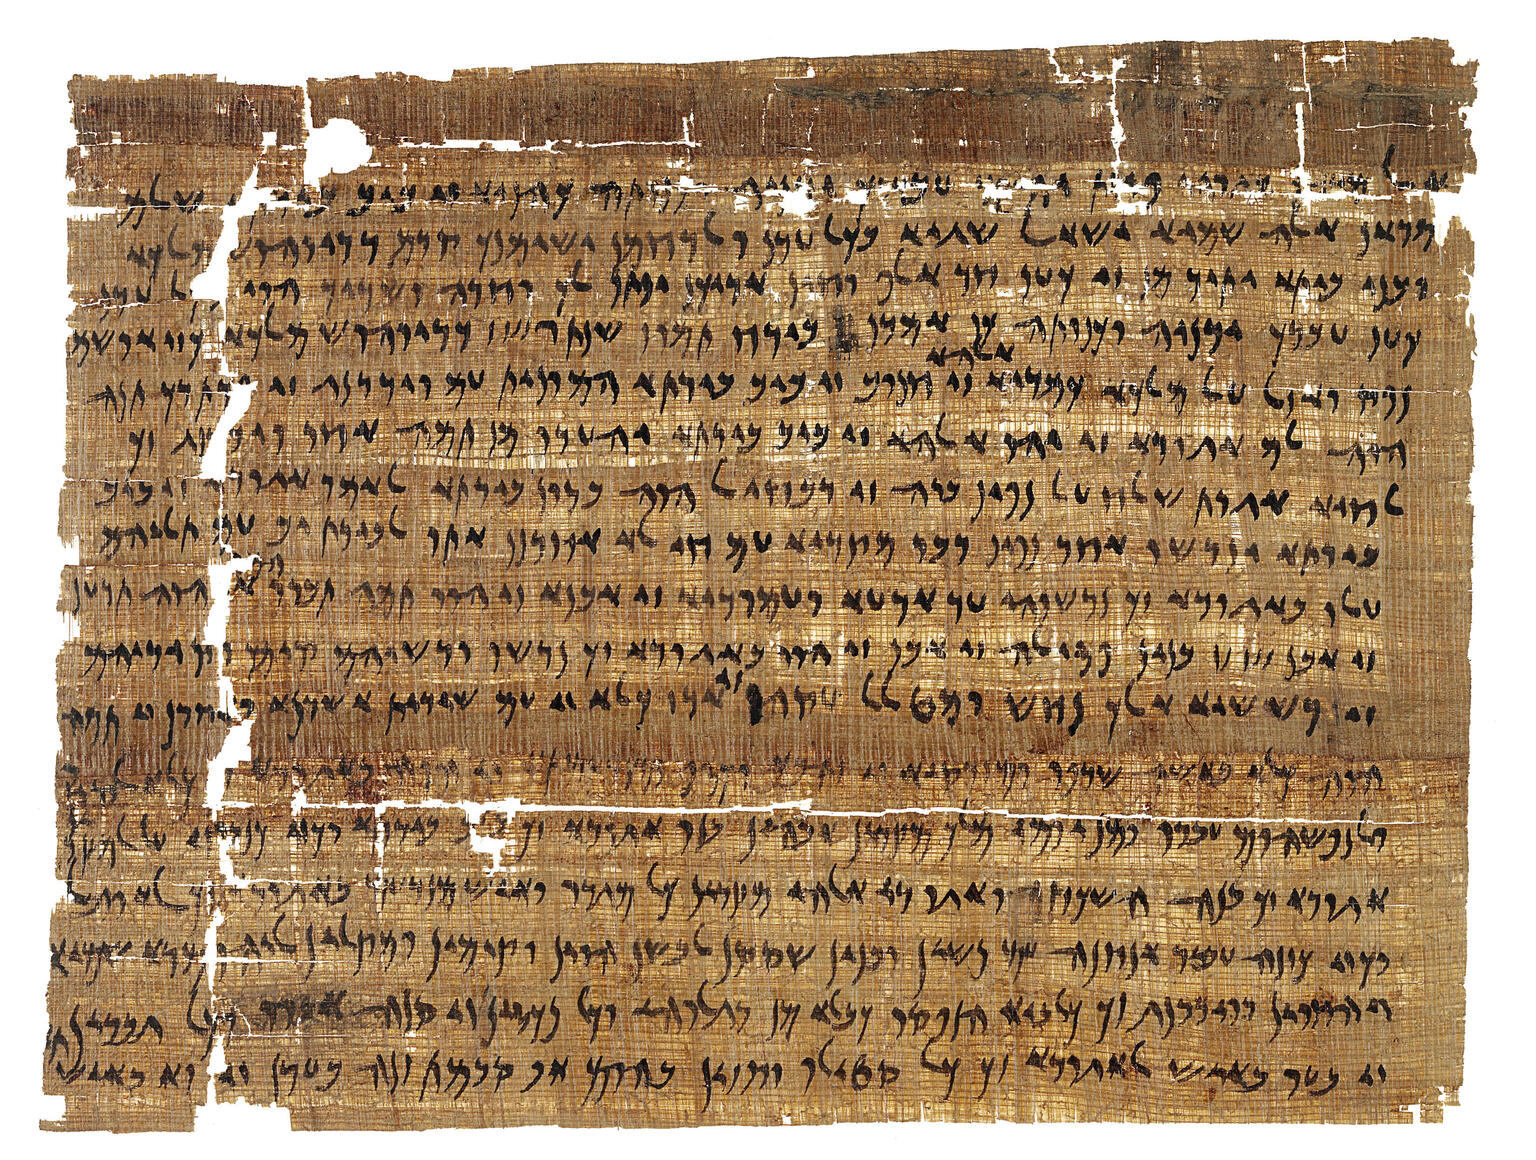 Fragmentary papyrus page of Hebrew writing.